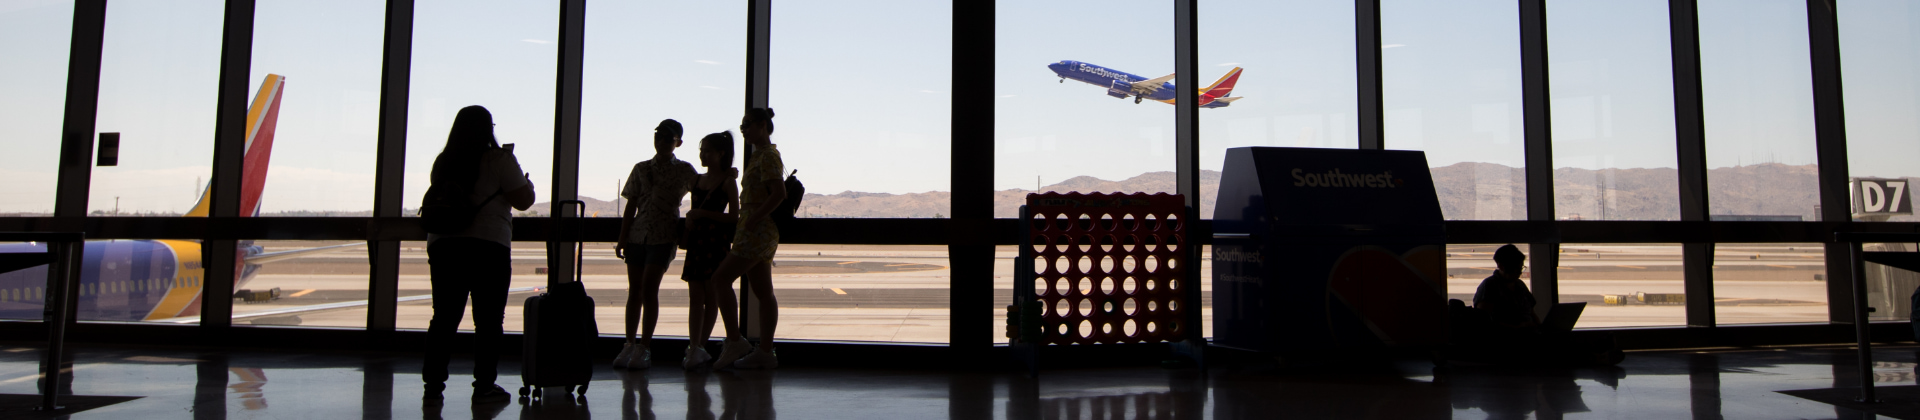 Southwest plan takes off in front of silhouetted people in a terminal